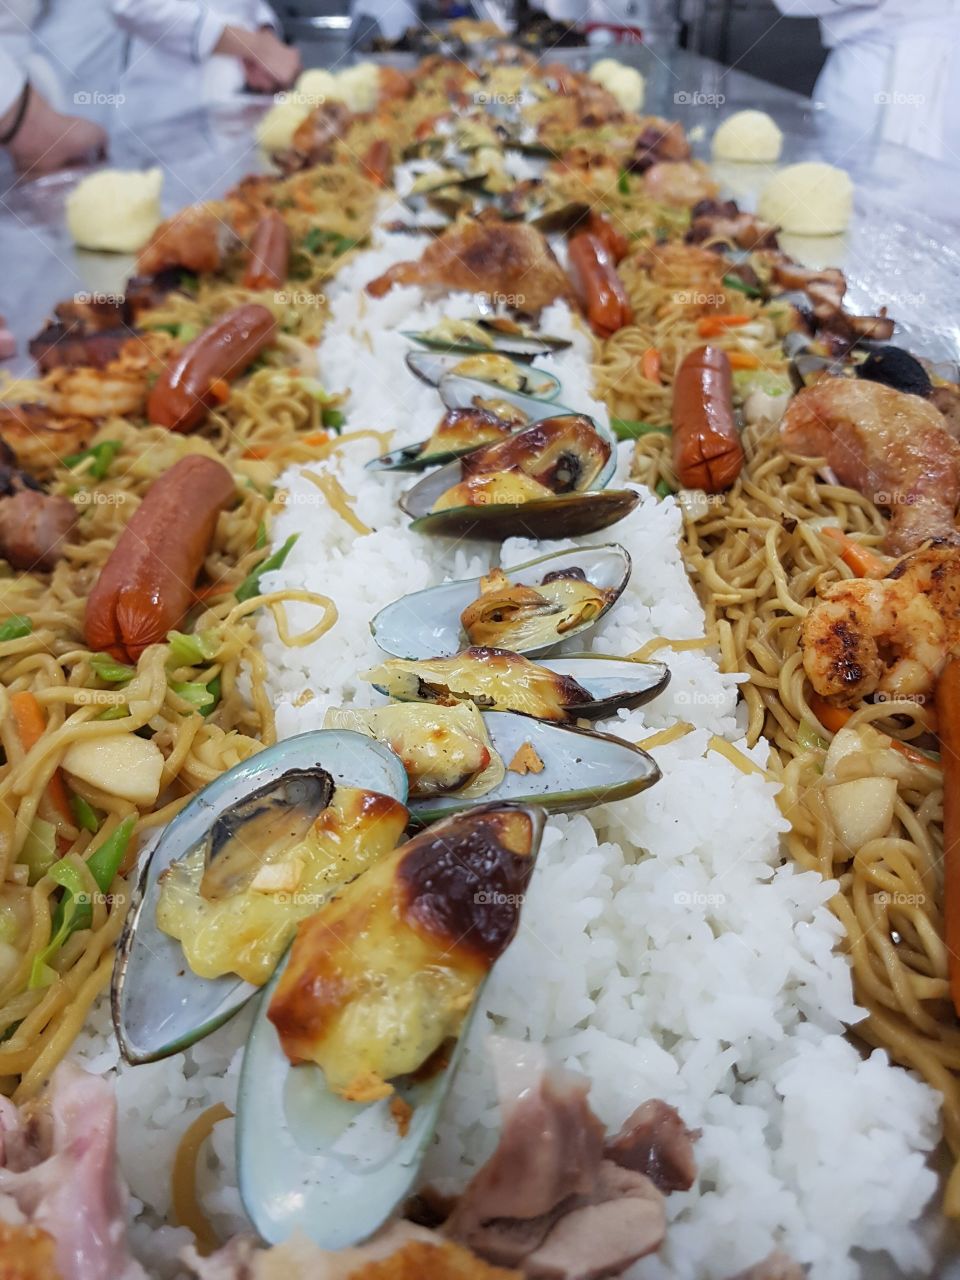 Boodle Fight is one of my favorite ways of eating!